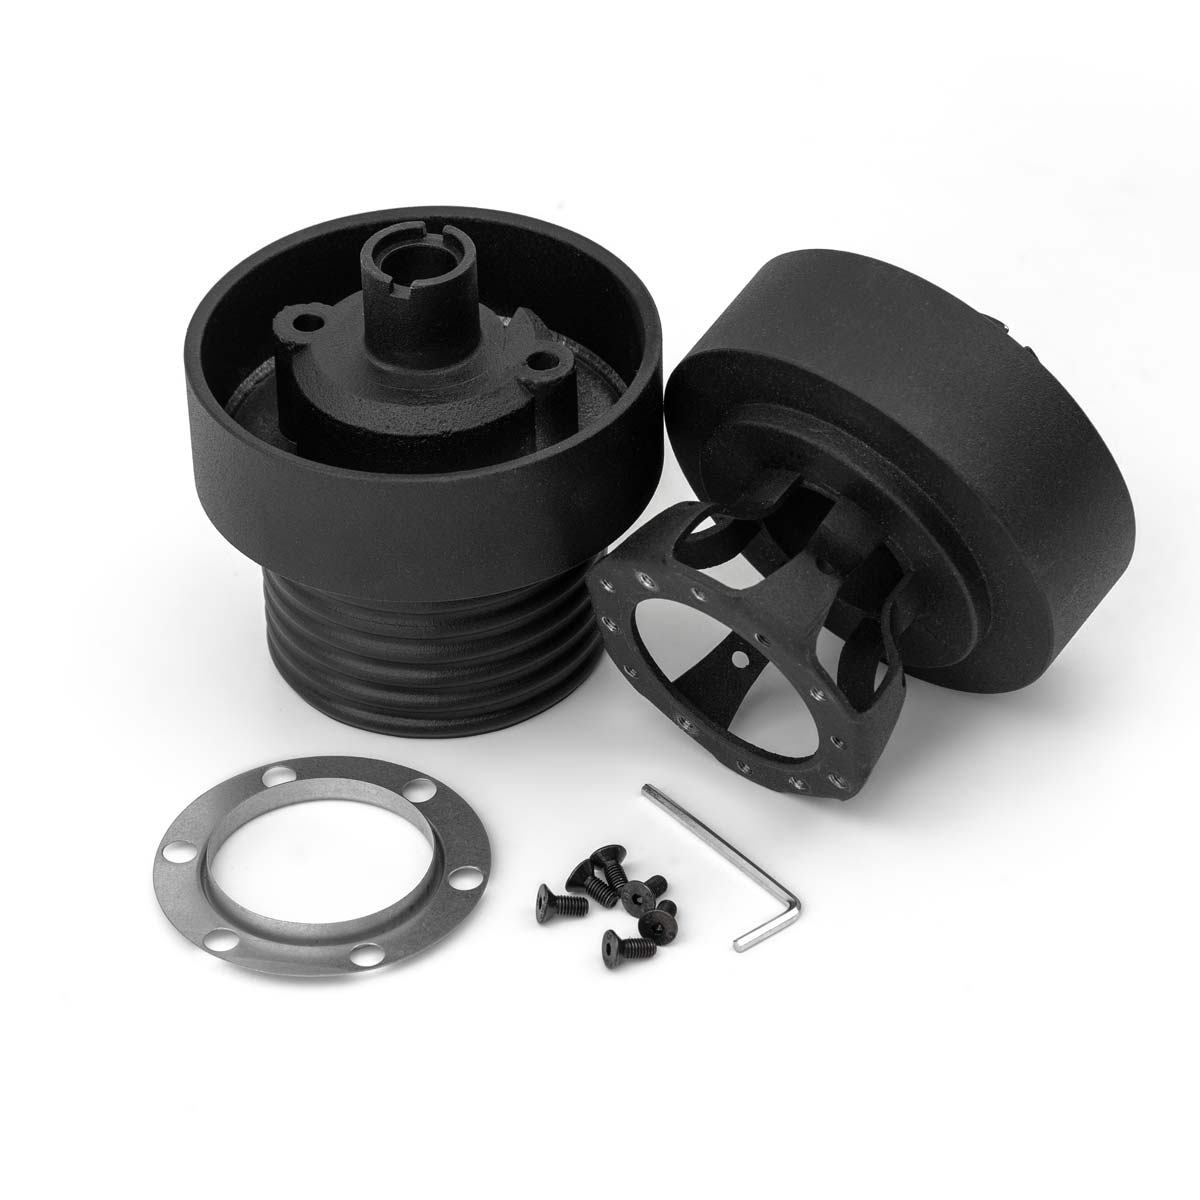 LUISI steering wheel hub Fiat Seicento 1998-2000 (TÜV-compliant deformable / 6x74mm 6x70mm)